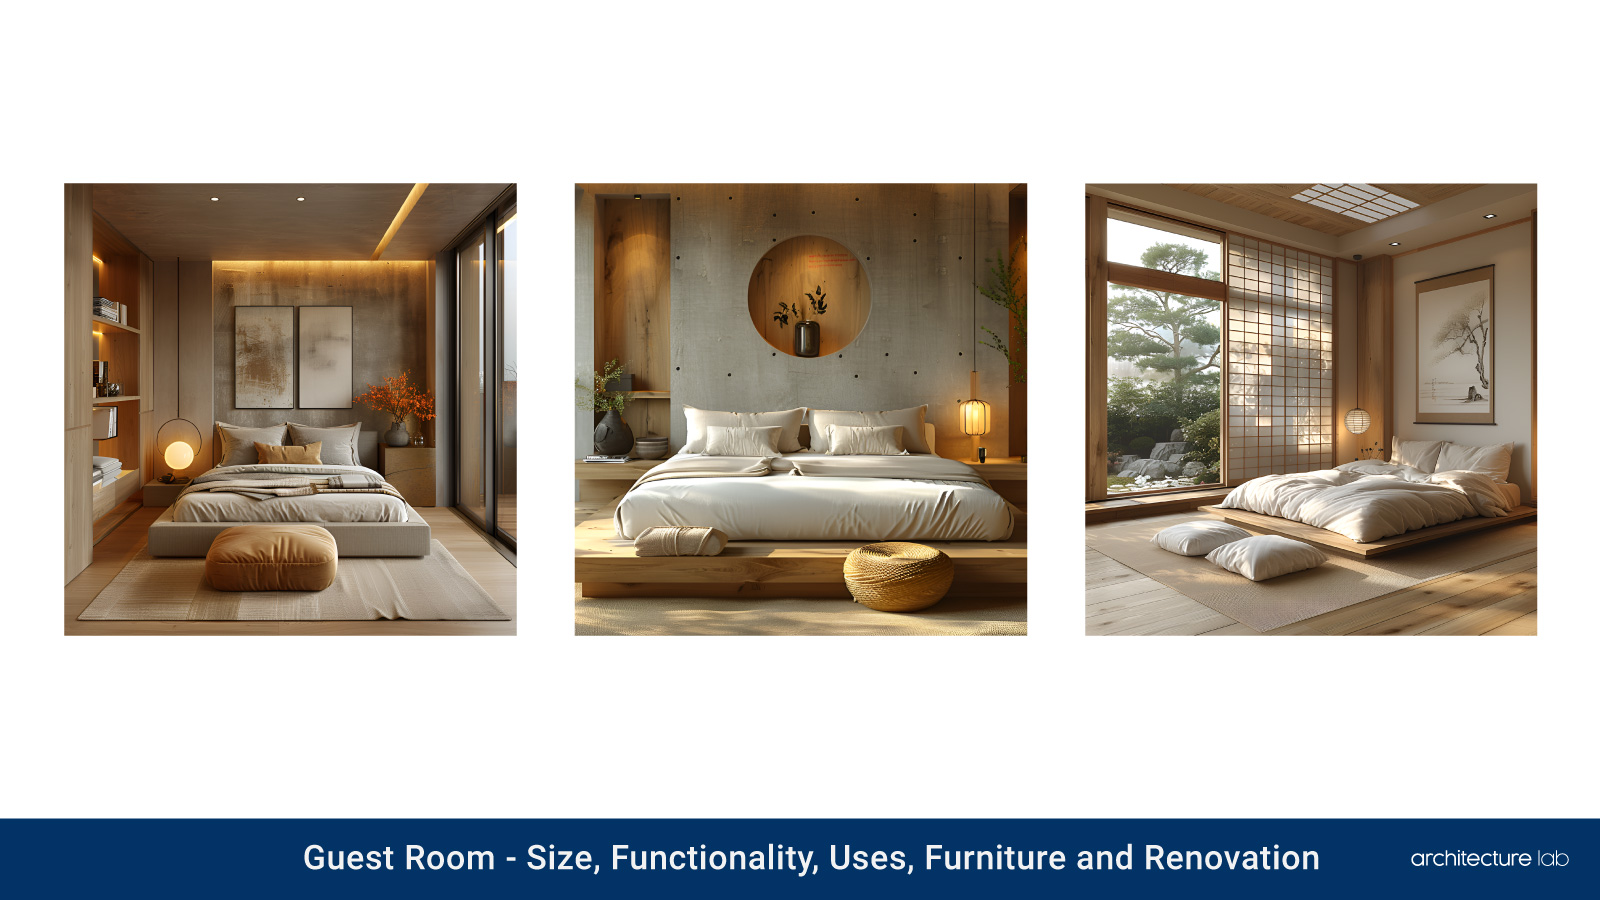 Guest room: size, functionality, uses, furniture and renovation